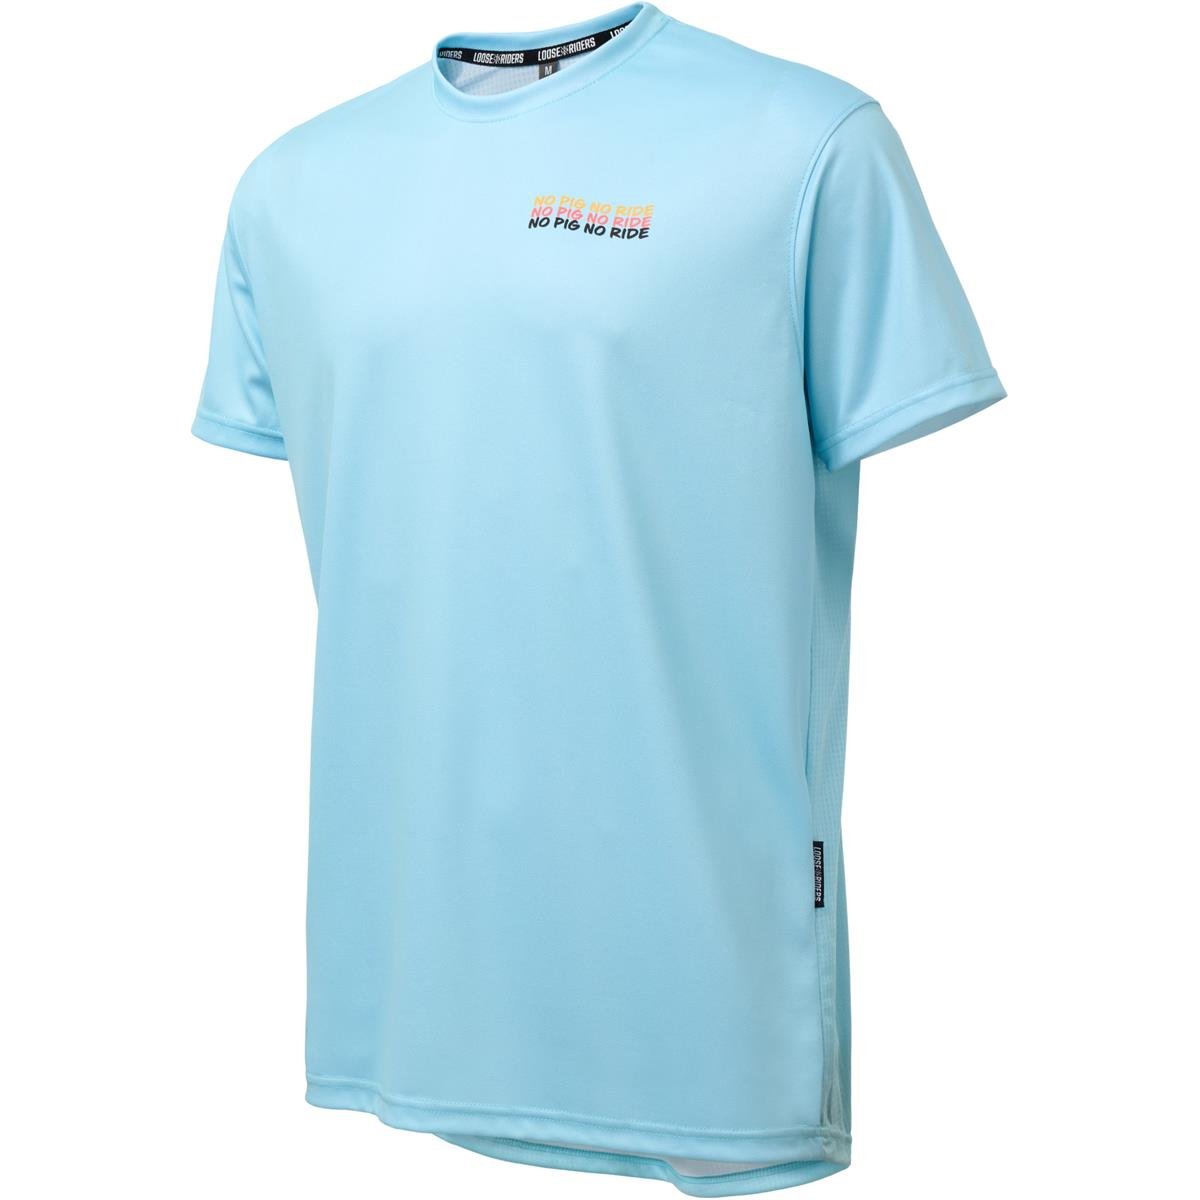 Loose Riders MTB Jersey Short Sleeve Pigs Shred Pigs of Shred - Teal